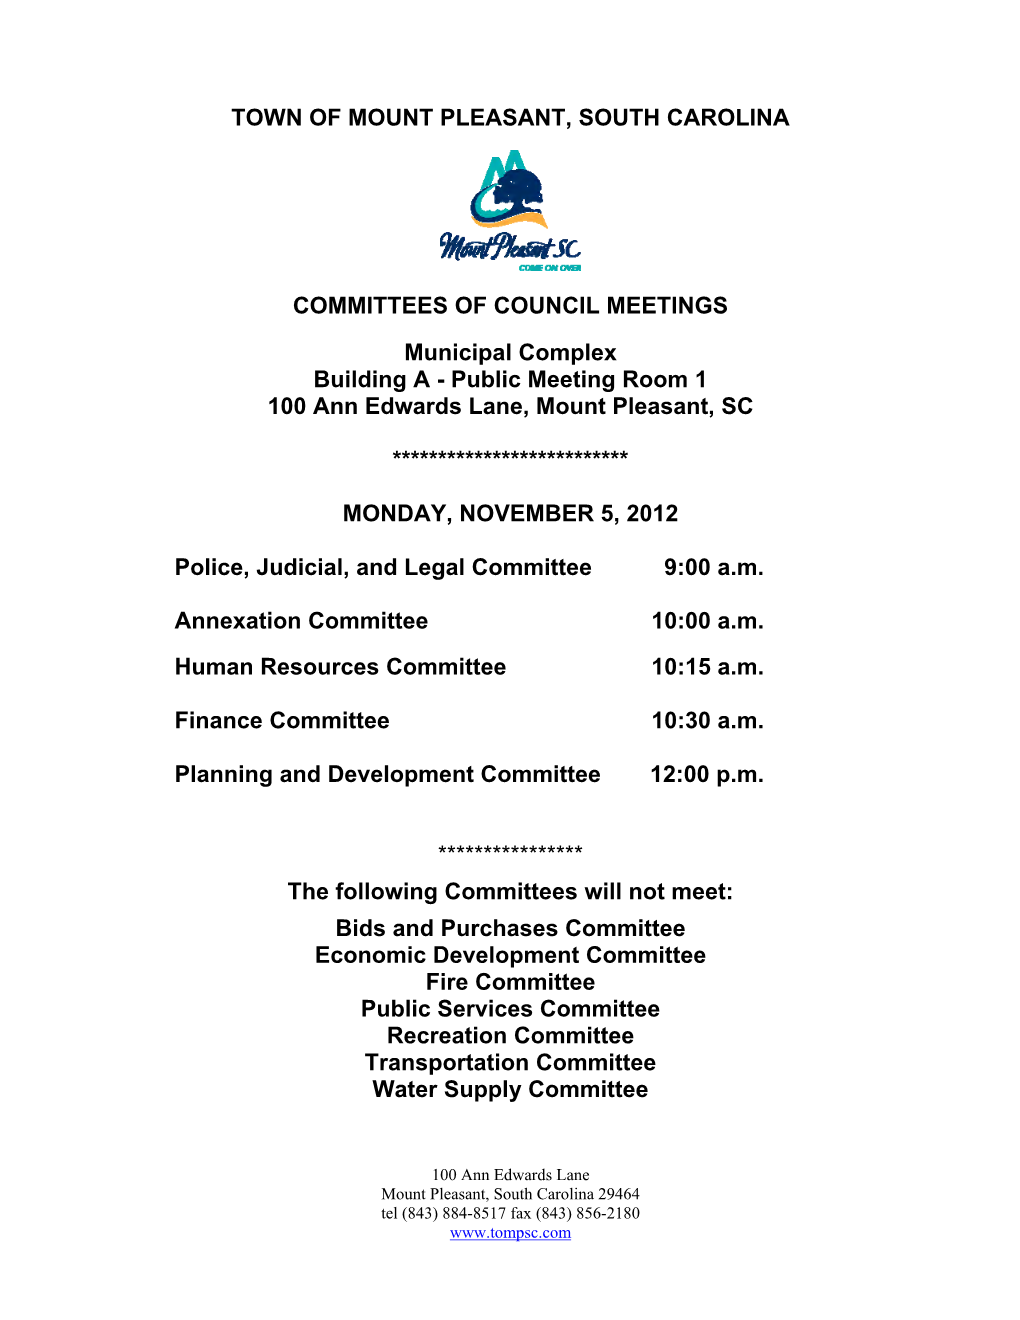 Town of Mount Pleasant, South Carolina Committees